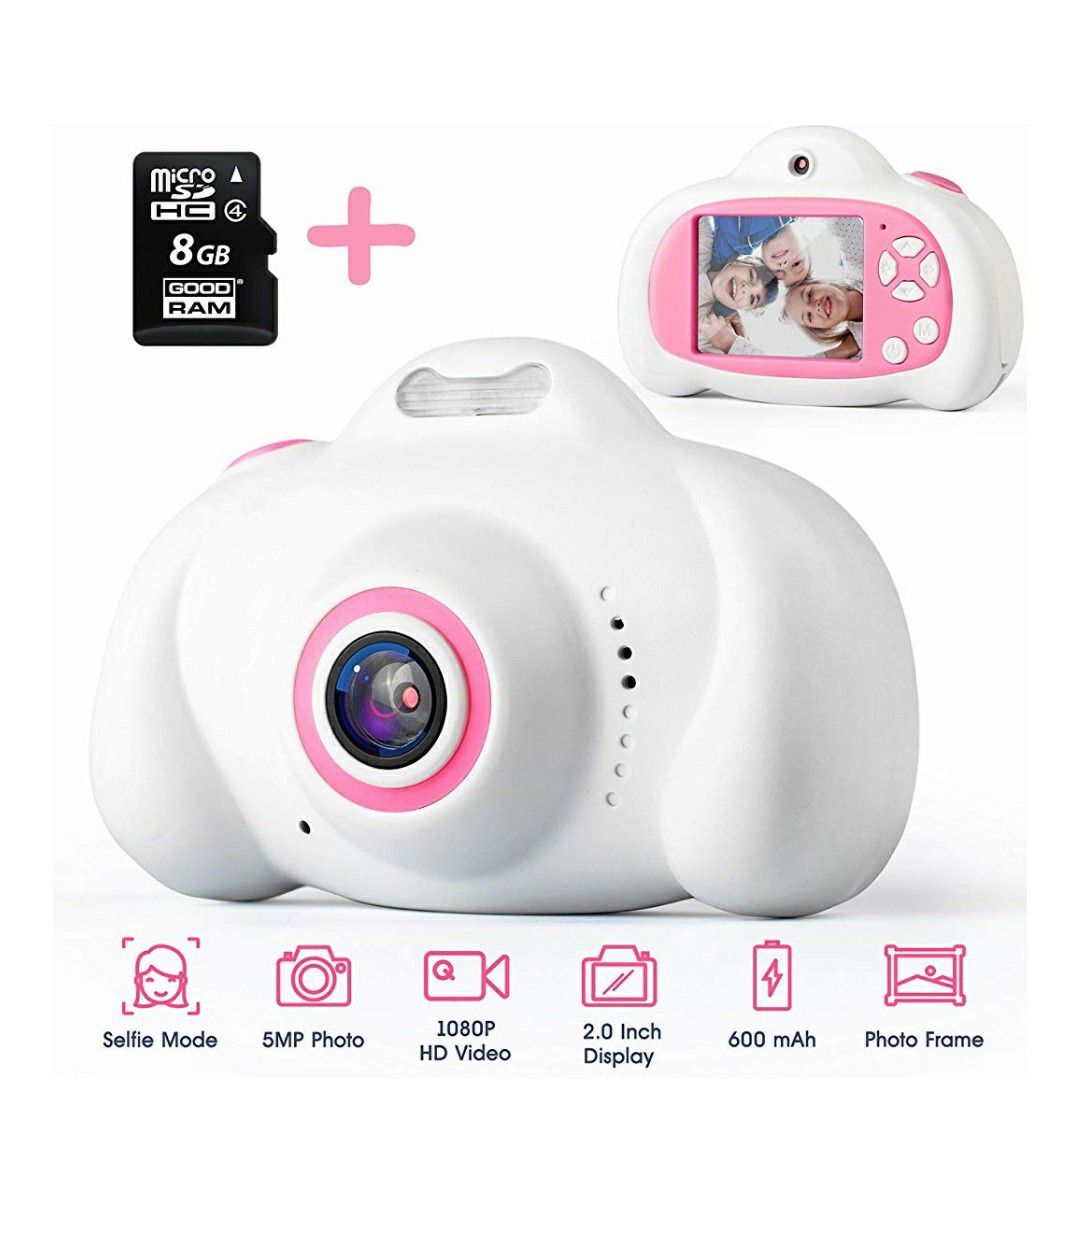 Selfie Kids Camera for Girls & Boys as Gift - Digital Toy for Children 3-8 Year Old - Shockproof 2" HD Display, 2 Lens 5MP Photo & 1080P Videо